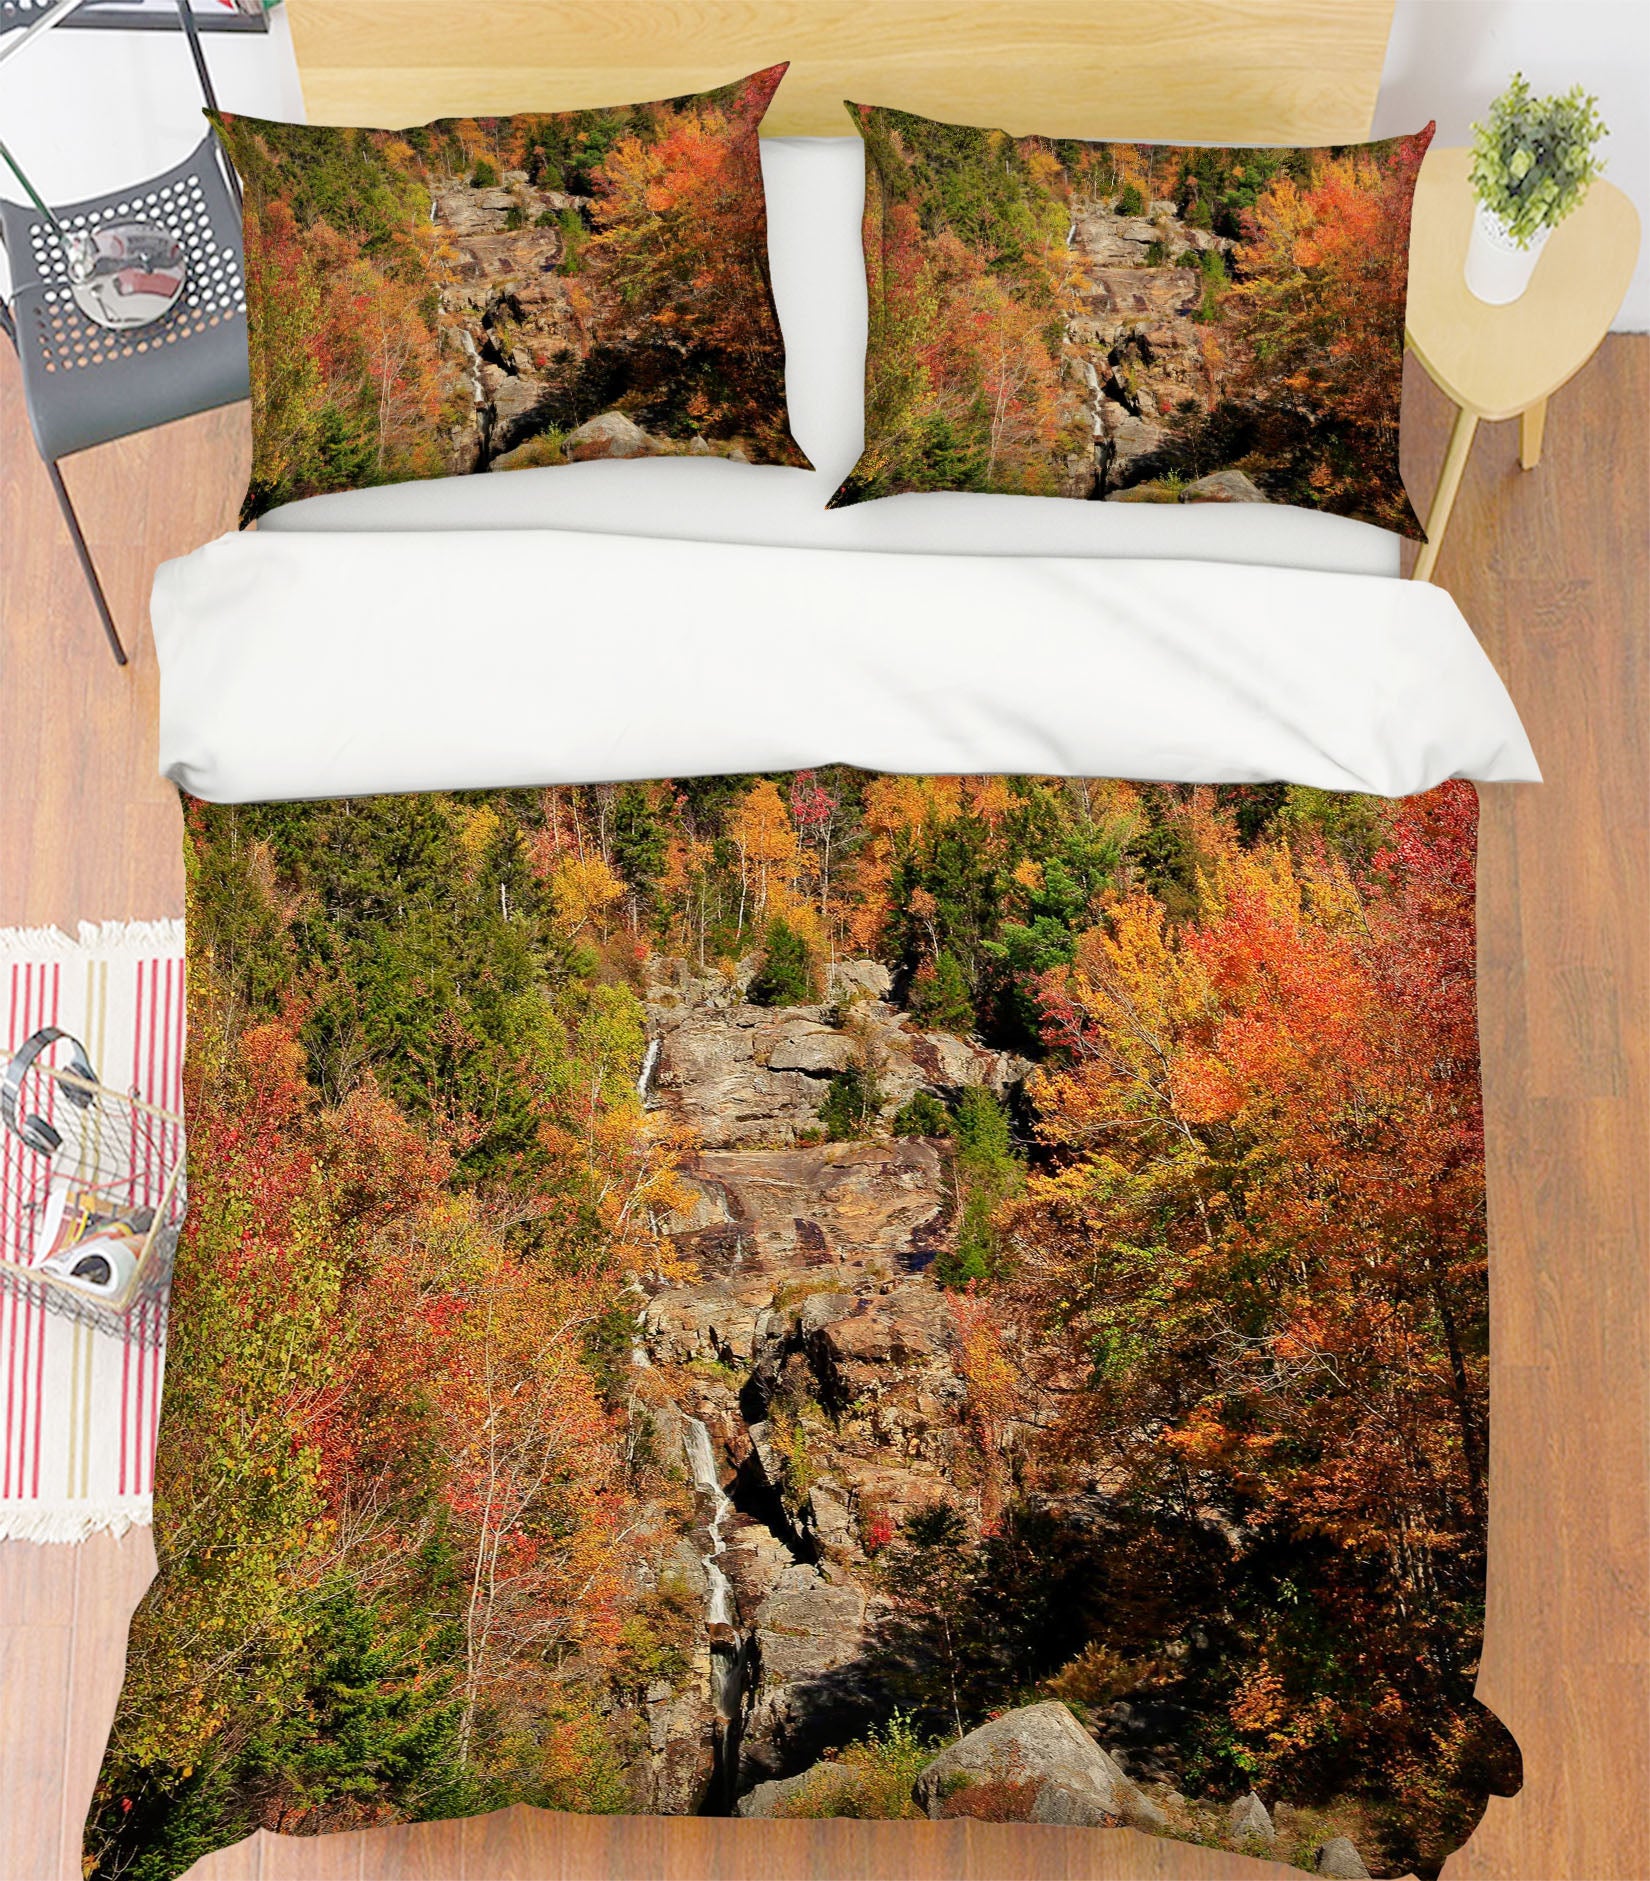 3D Trees In The Mountains 62195 Kathy Barefield Bedding Bed Pillowcases Quilt